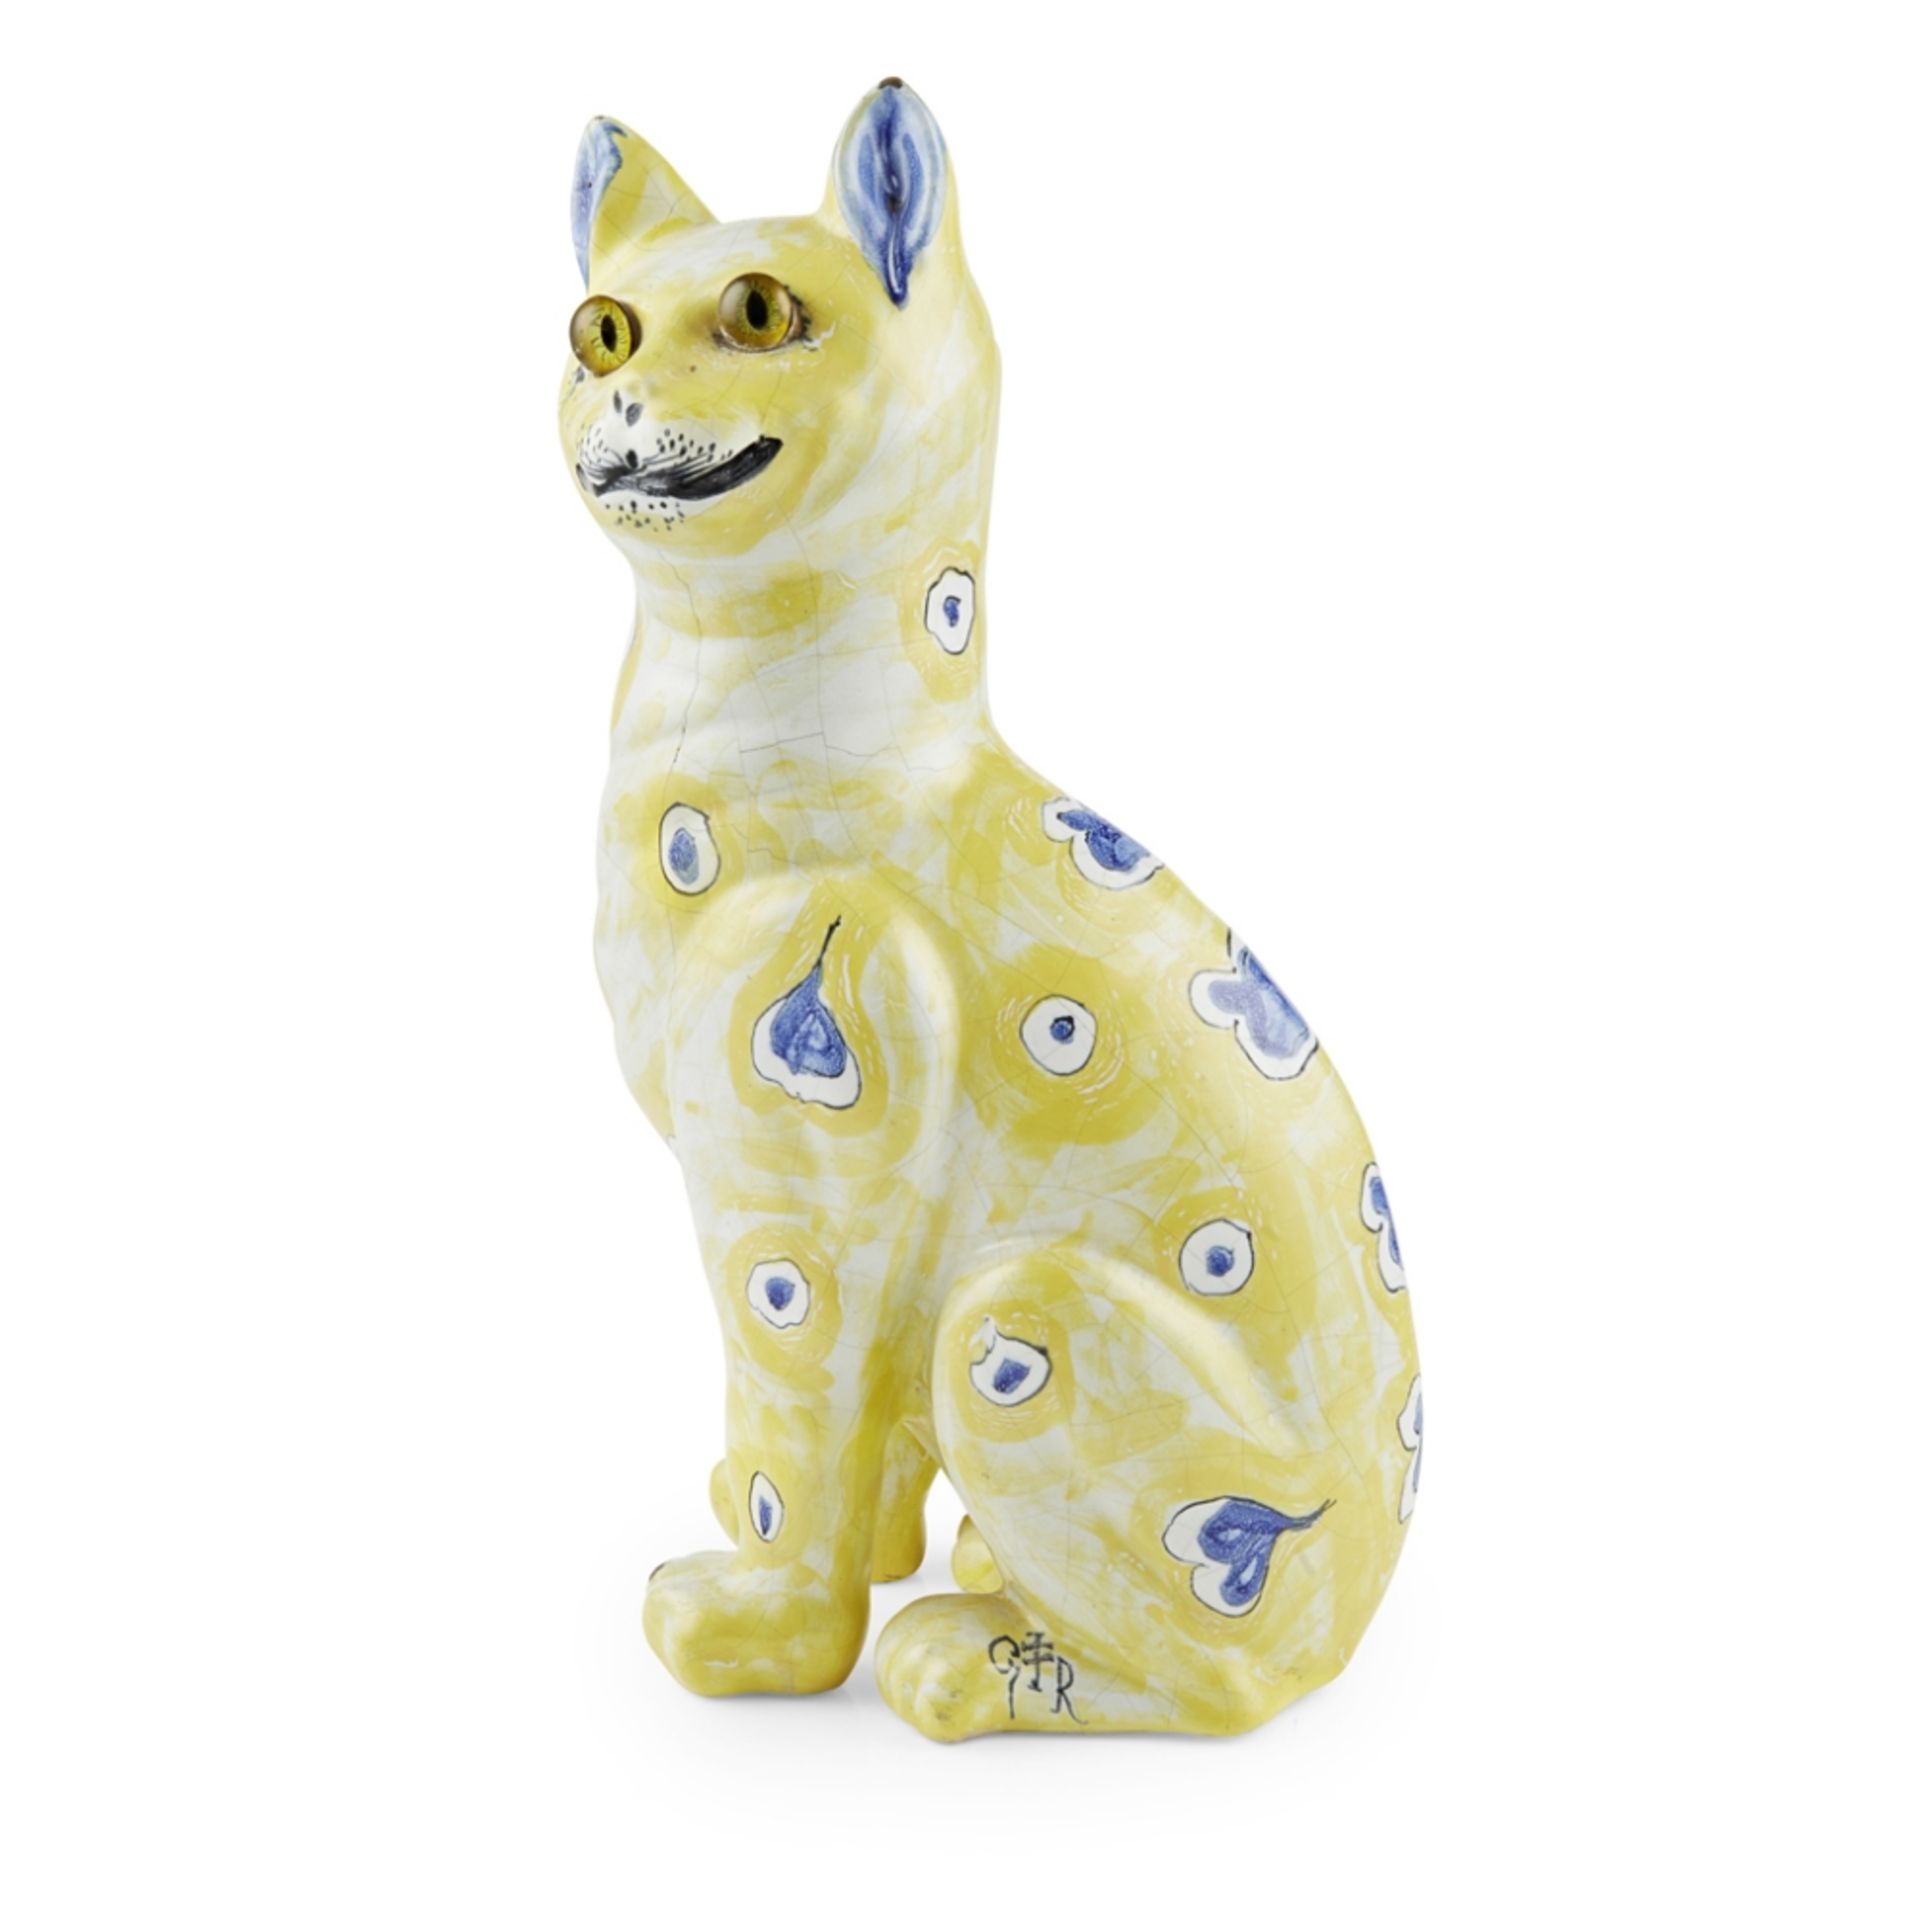 EMILE GALLE (1846-1904) ART NOUVEAU FAIENCE CAT FIGURE, CIRCA 1890 with applied glass eyes,